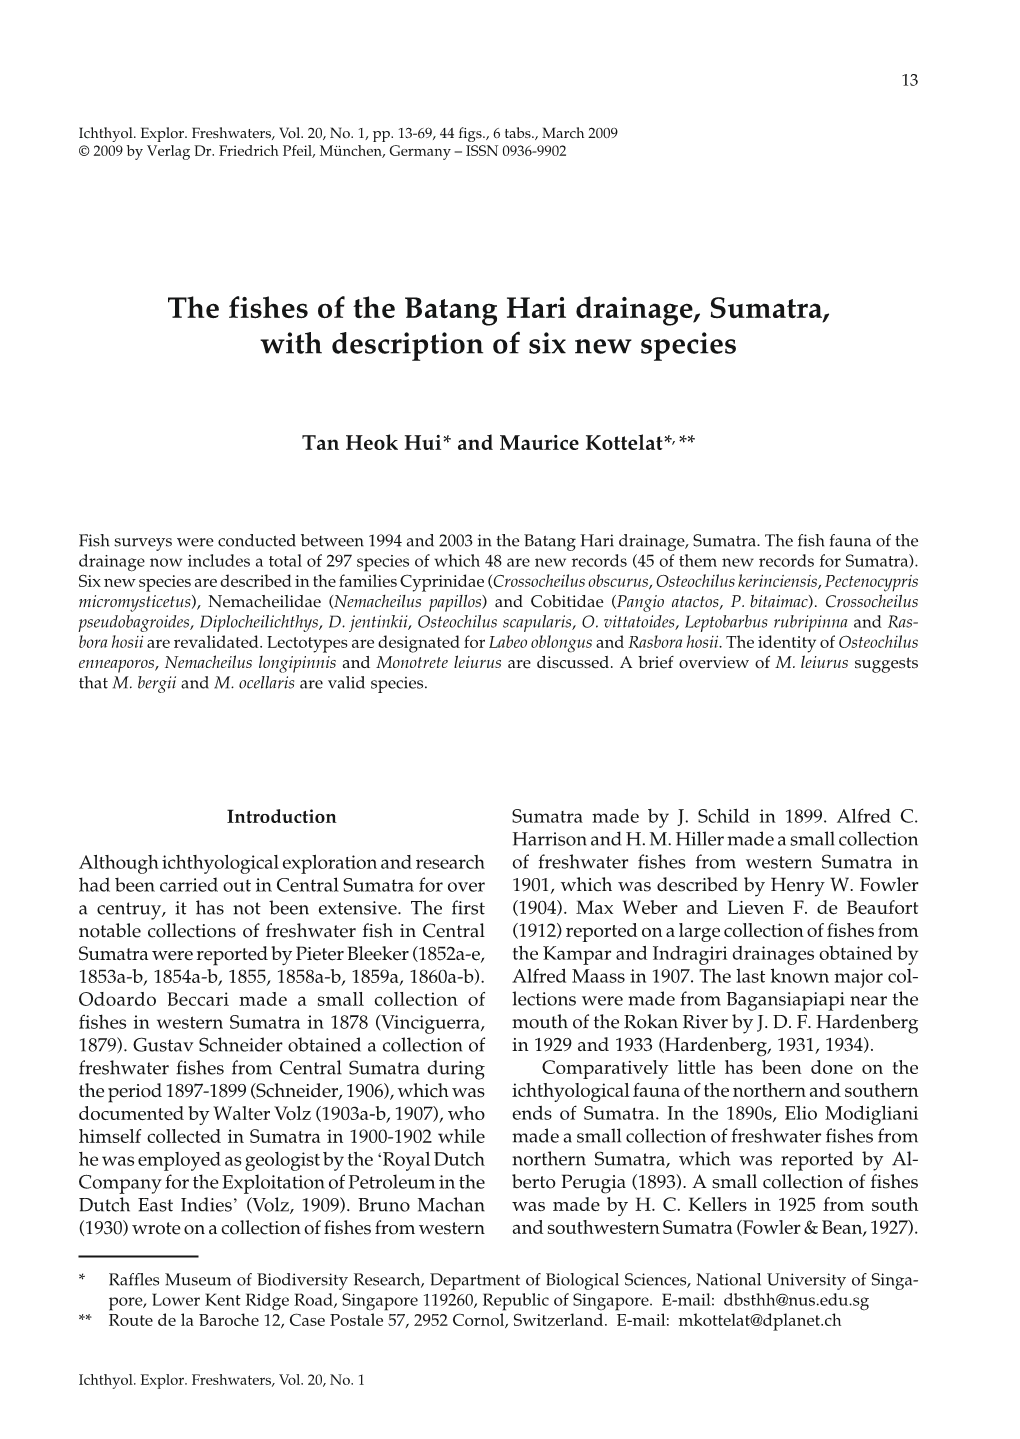 The Fishes of the Batang Hari Drainage, Sumatra, with Description of Six New Species